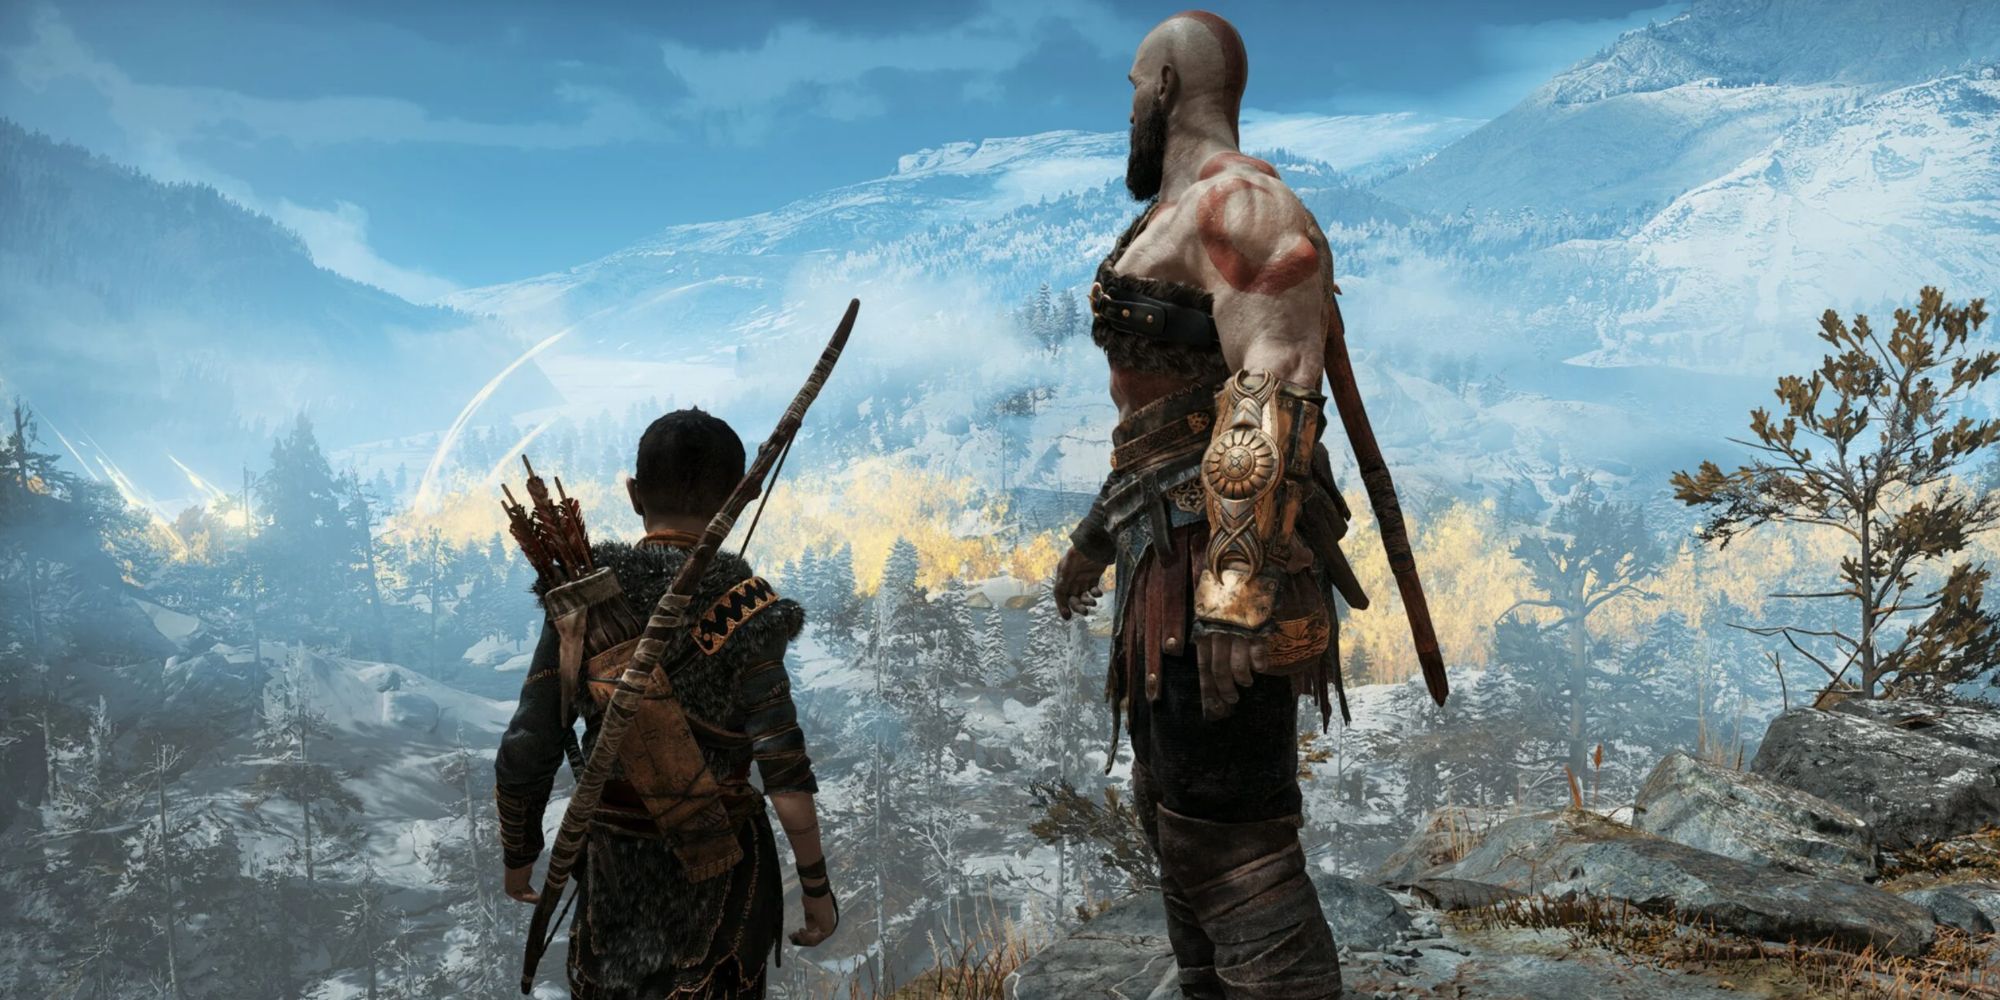 Kratos and Atreus overlooking a snowy mountain landscape and forest in God of War